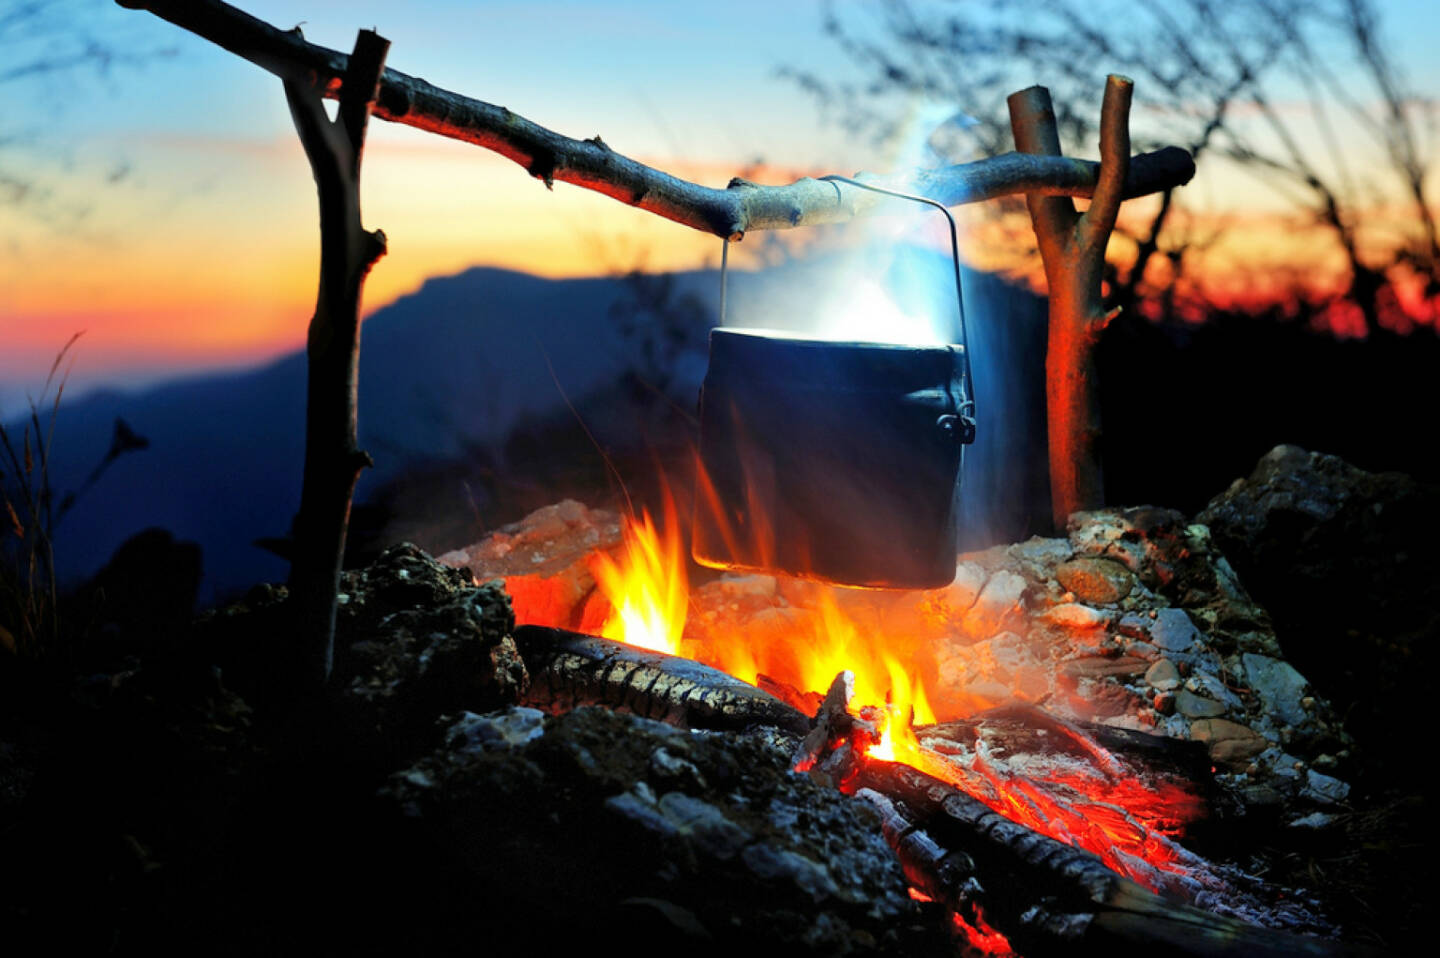 Zaubertrank, Feuer, Lagerfeuer, Topf, kochen, camping, Wildnis, Holz, http://www.shutterstock.com/de/pic-161030141/stock-photo-campfire-in-the-night-time.html